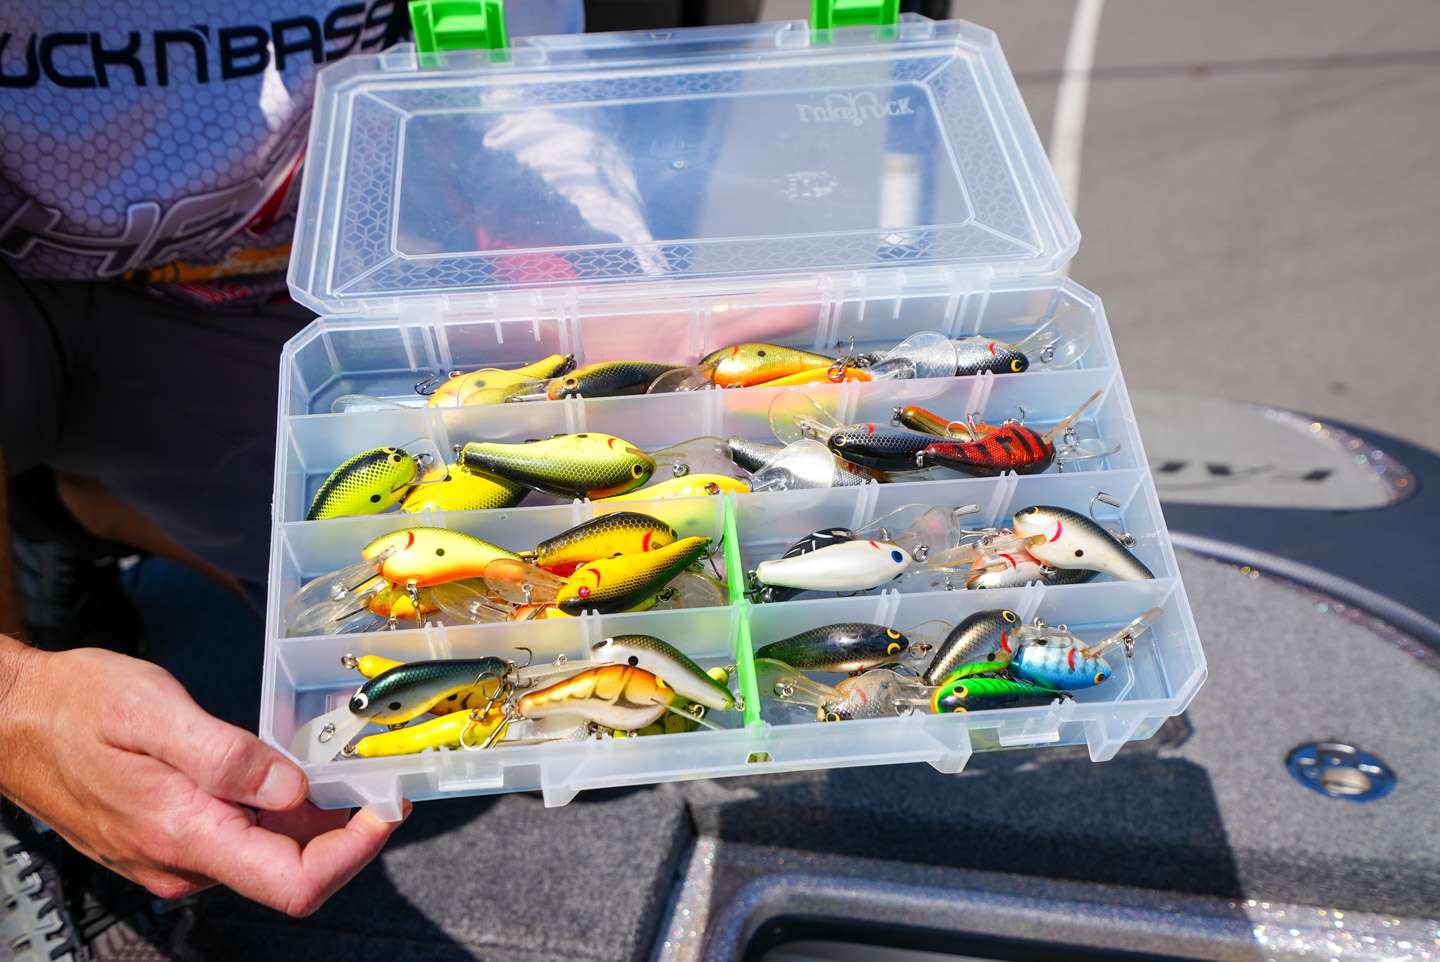 Inside the box is a variety of crankbaits that are very difficult to find. 